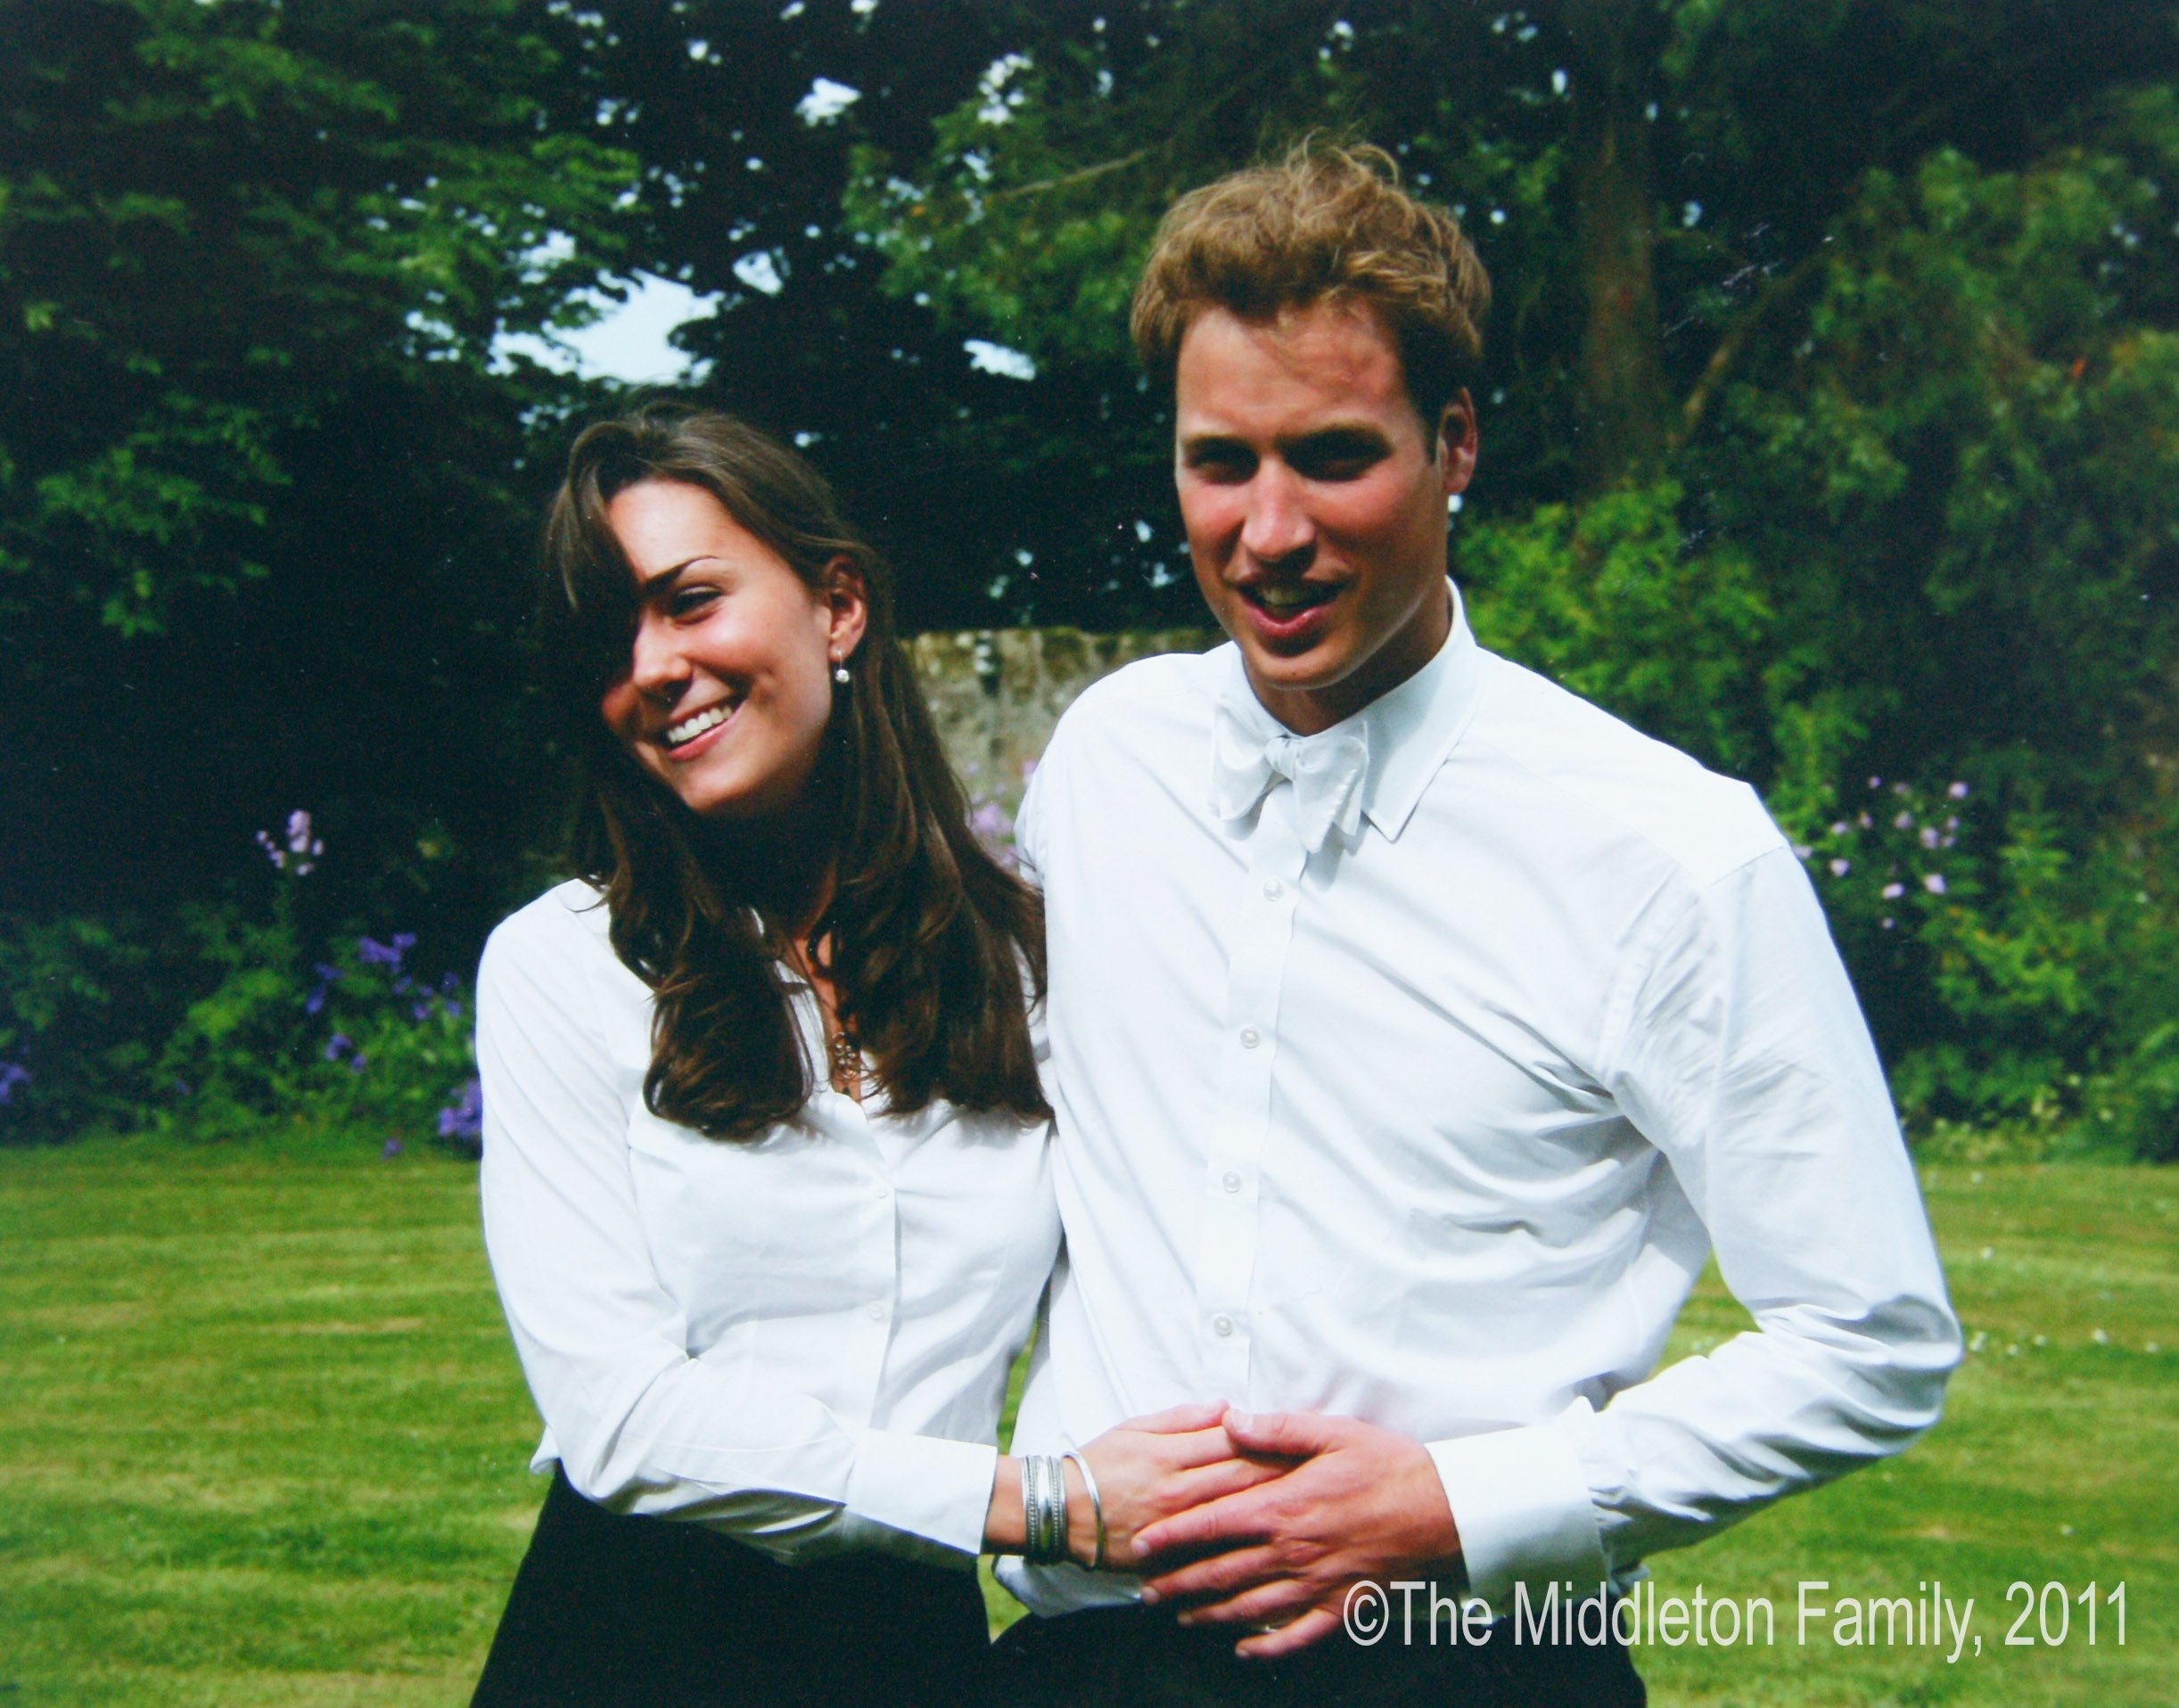 Prince William and  Kate Middleton on their graduation day at St Andrew's University on June 23, 2005 in Scotland | Source: Getty Images